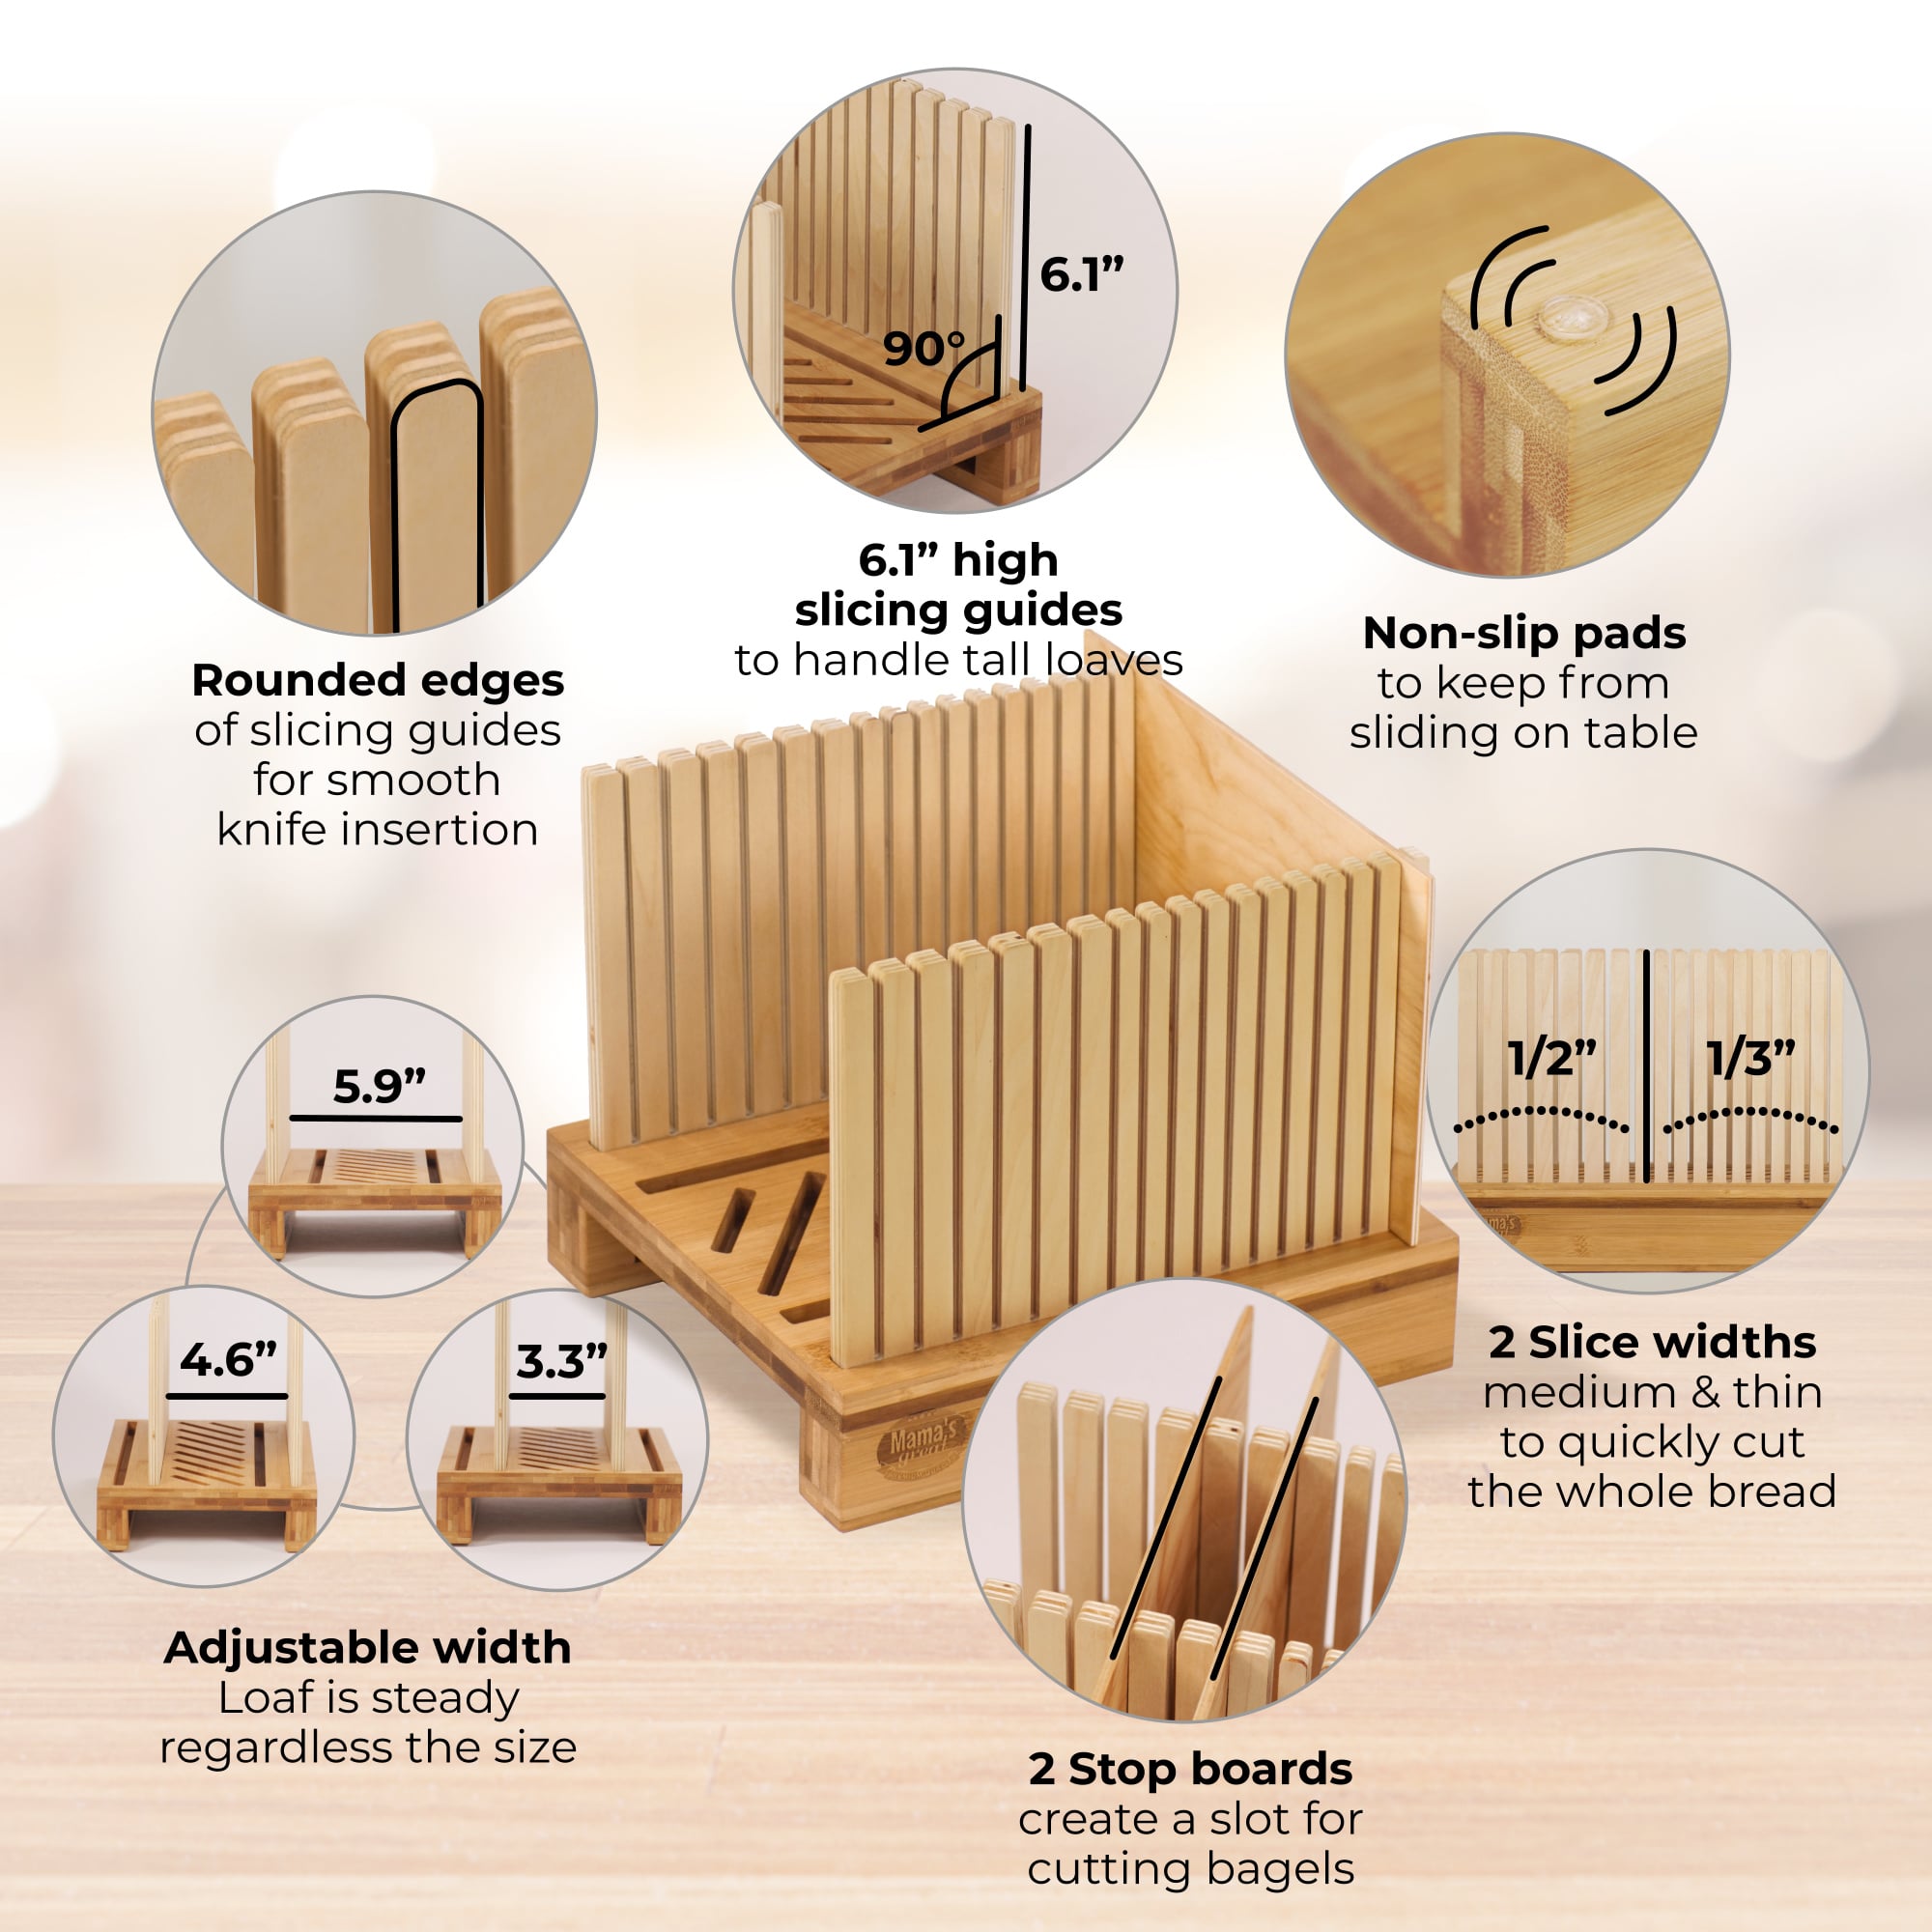 Bread Slicer Guide for Homemade Bread Bamboo Wooden Cutting Board